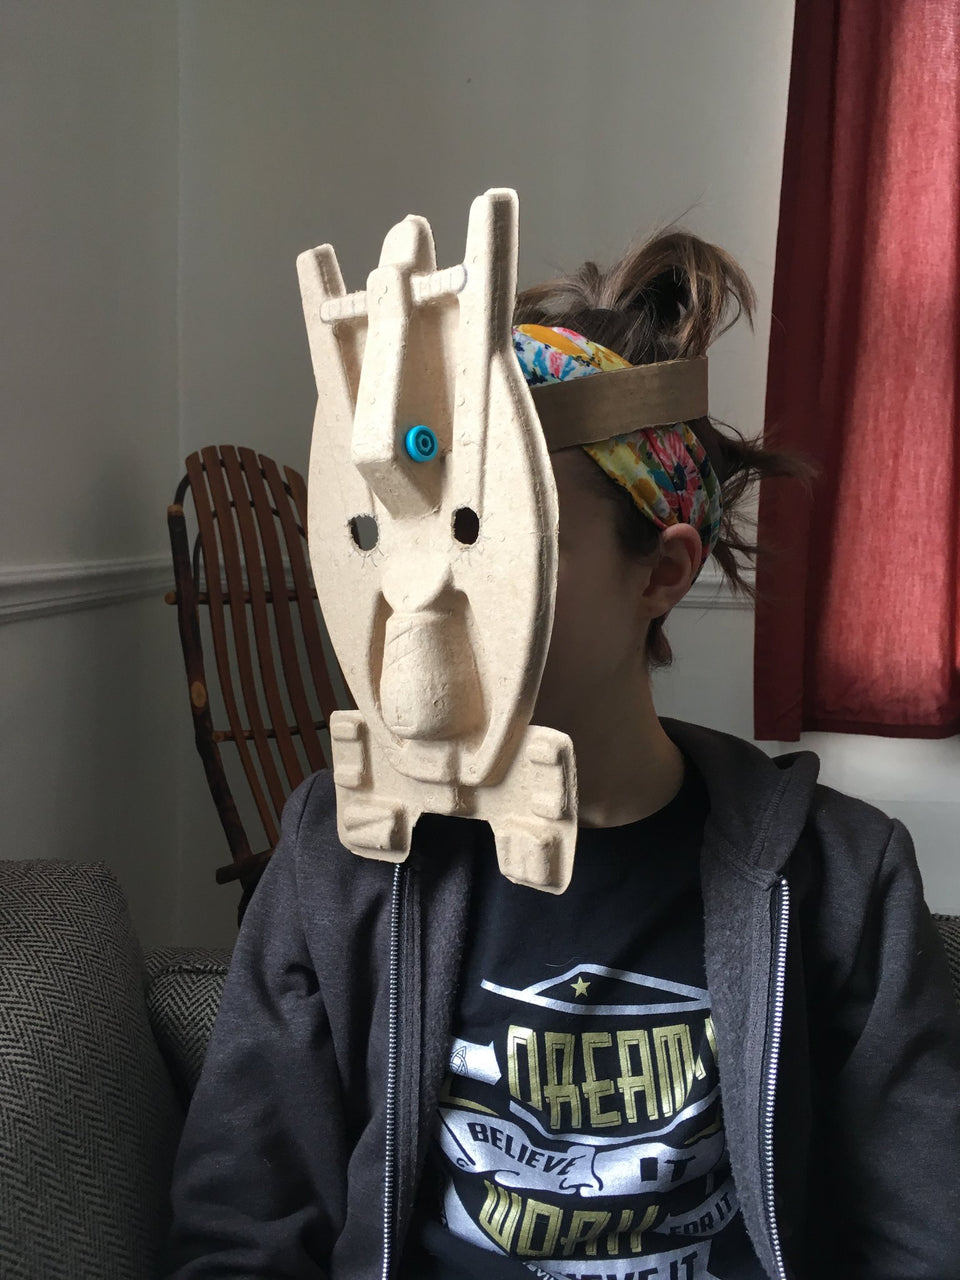 Bought a new lamp and made an awesome Makedo cardboard mask